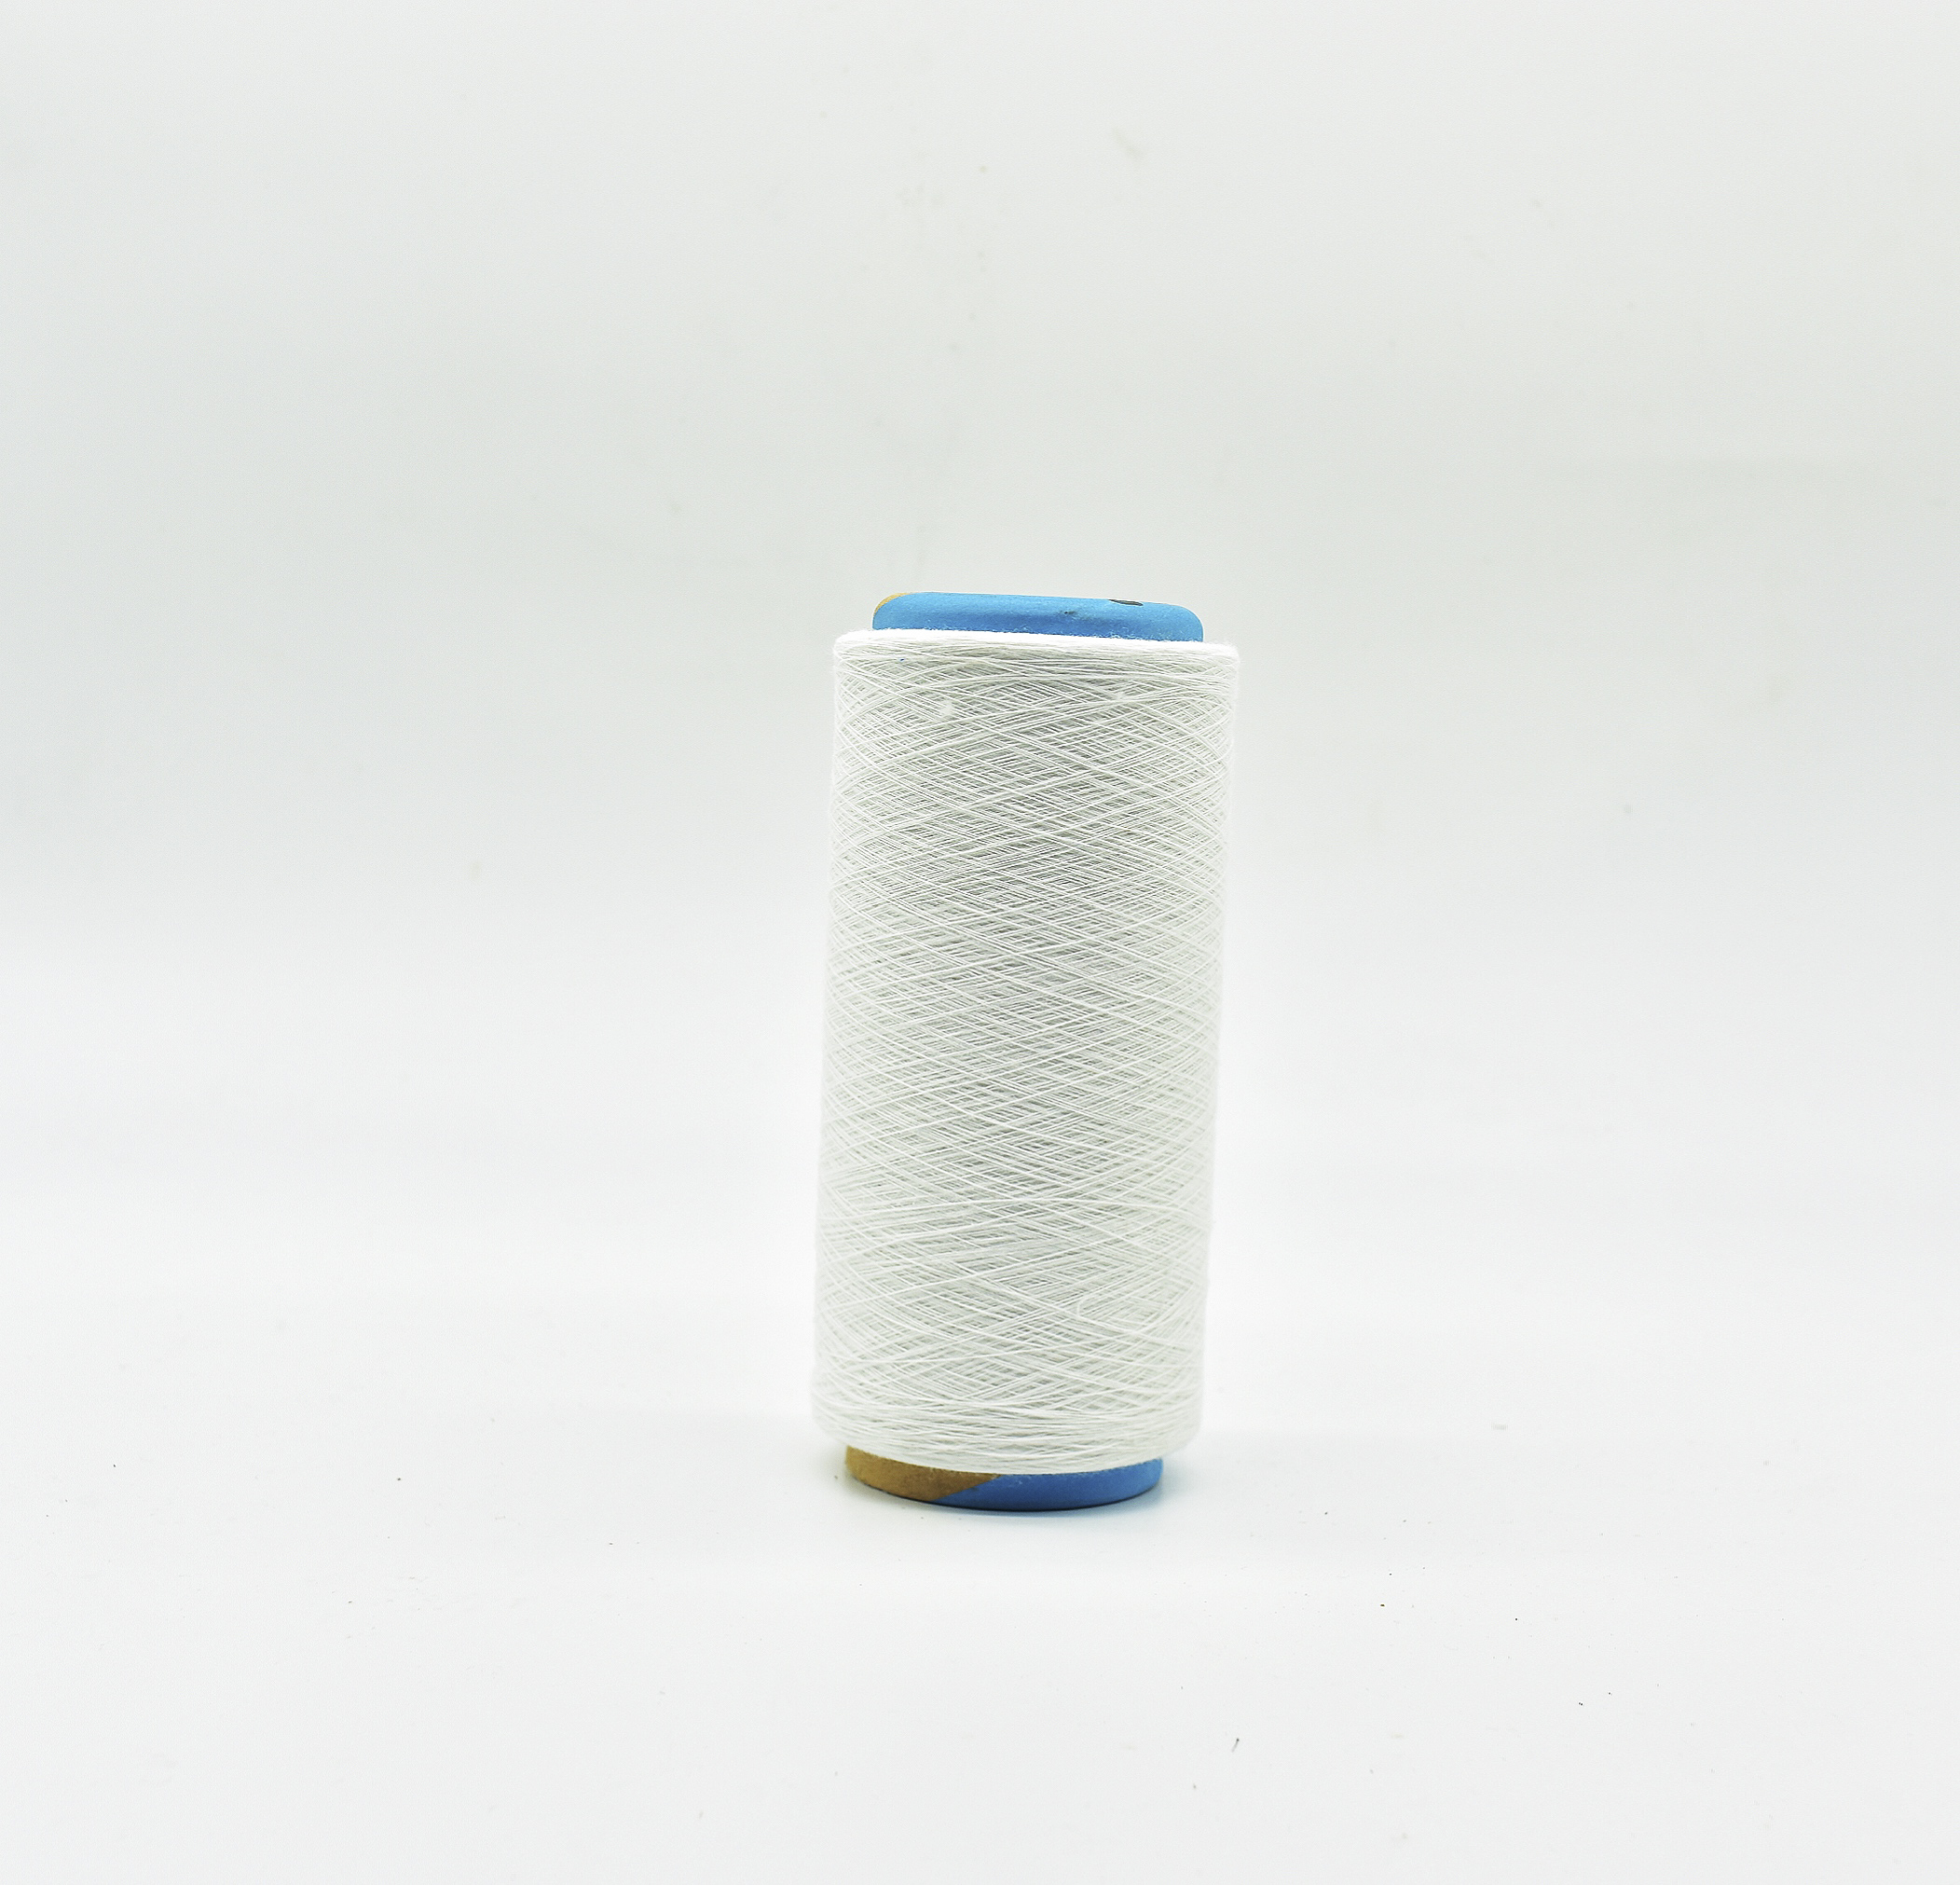 NE 28S optical white recycled cotton polyester yarn for weaving 